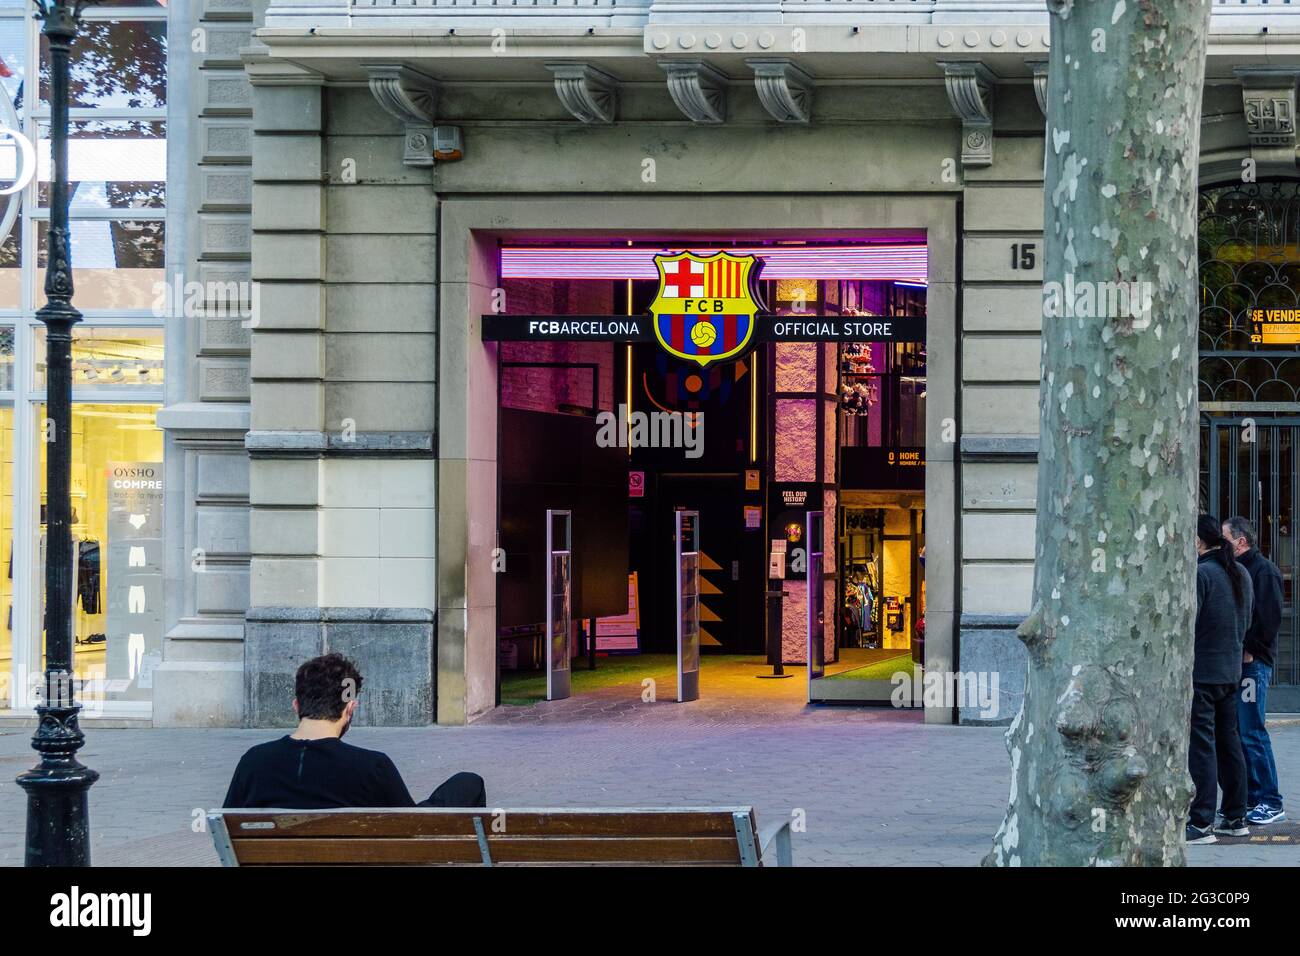 Barcelona, Spain - May 11, 2021. FCBotiga OFFICIAL STORE logo and facade represent the official point of sale where official Barça items are distribut Stock Photo